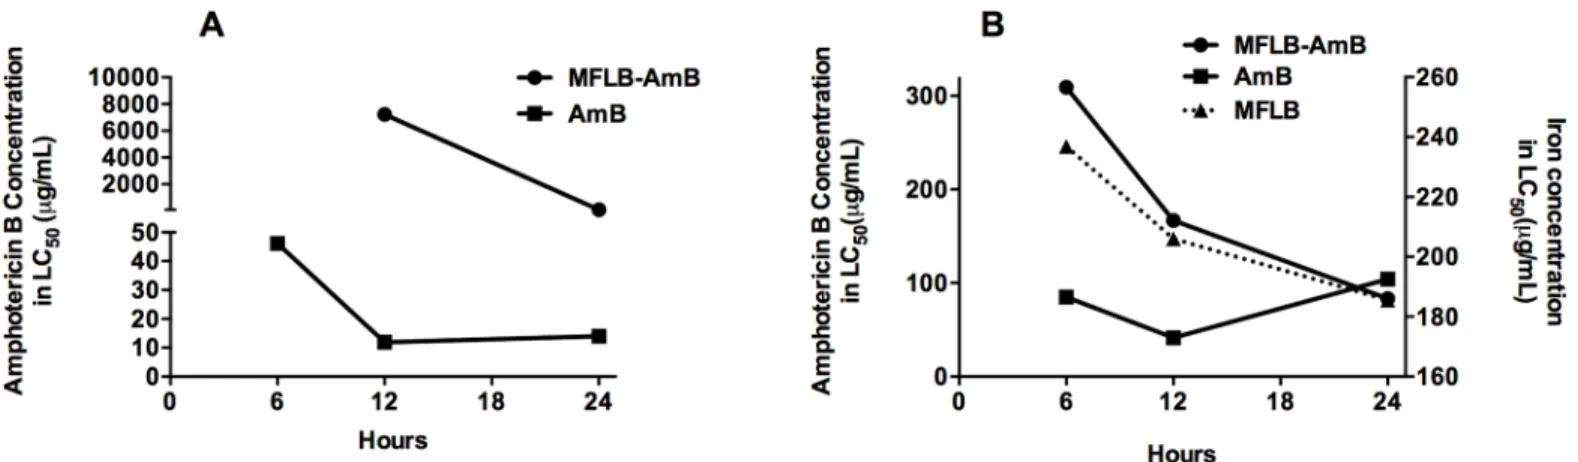 Fig 2. Cytotoxicity of AmB, MFLB-AmB or MFLB toward human mesangial cells and isolated mouse peritoneal macrophages